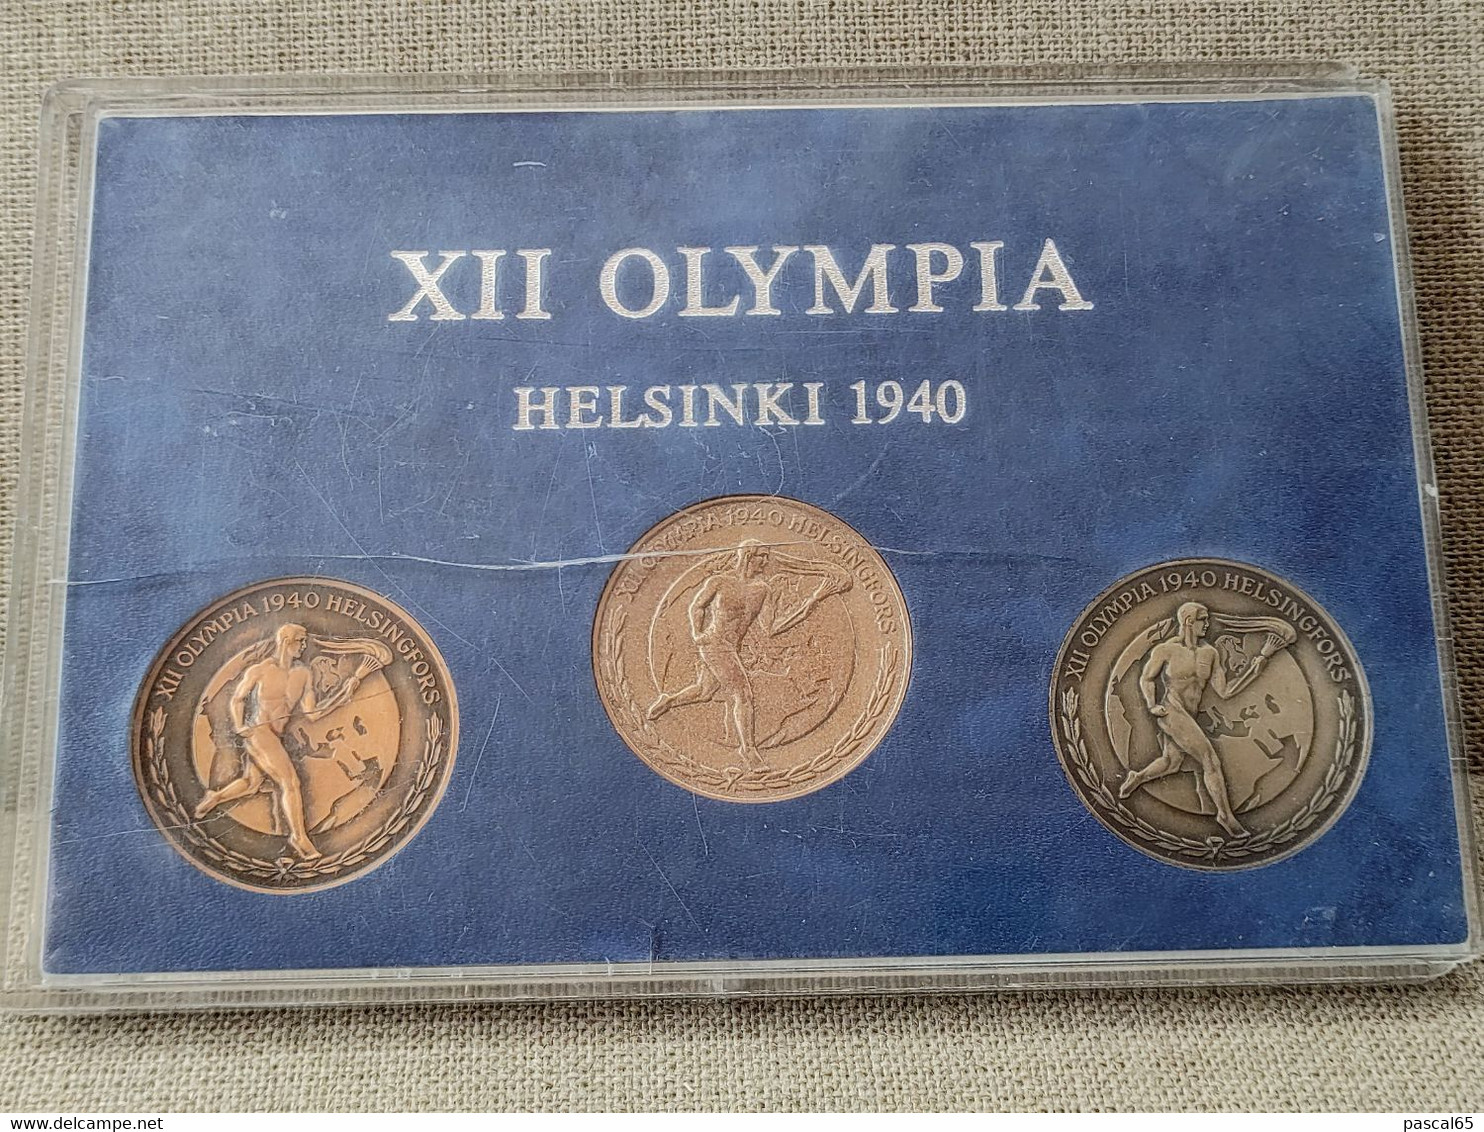 RARE, 3 Médailles 12 Jeux Olympiques Annulés Helsinki 1940 FINLANDE, 3 Medals XIIth Olympic Games Helsinki 1940 Finland - Apparel, Souvenirs & Other